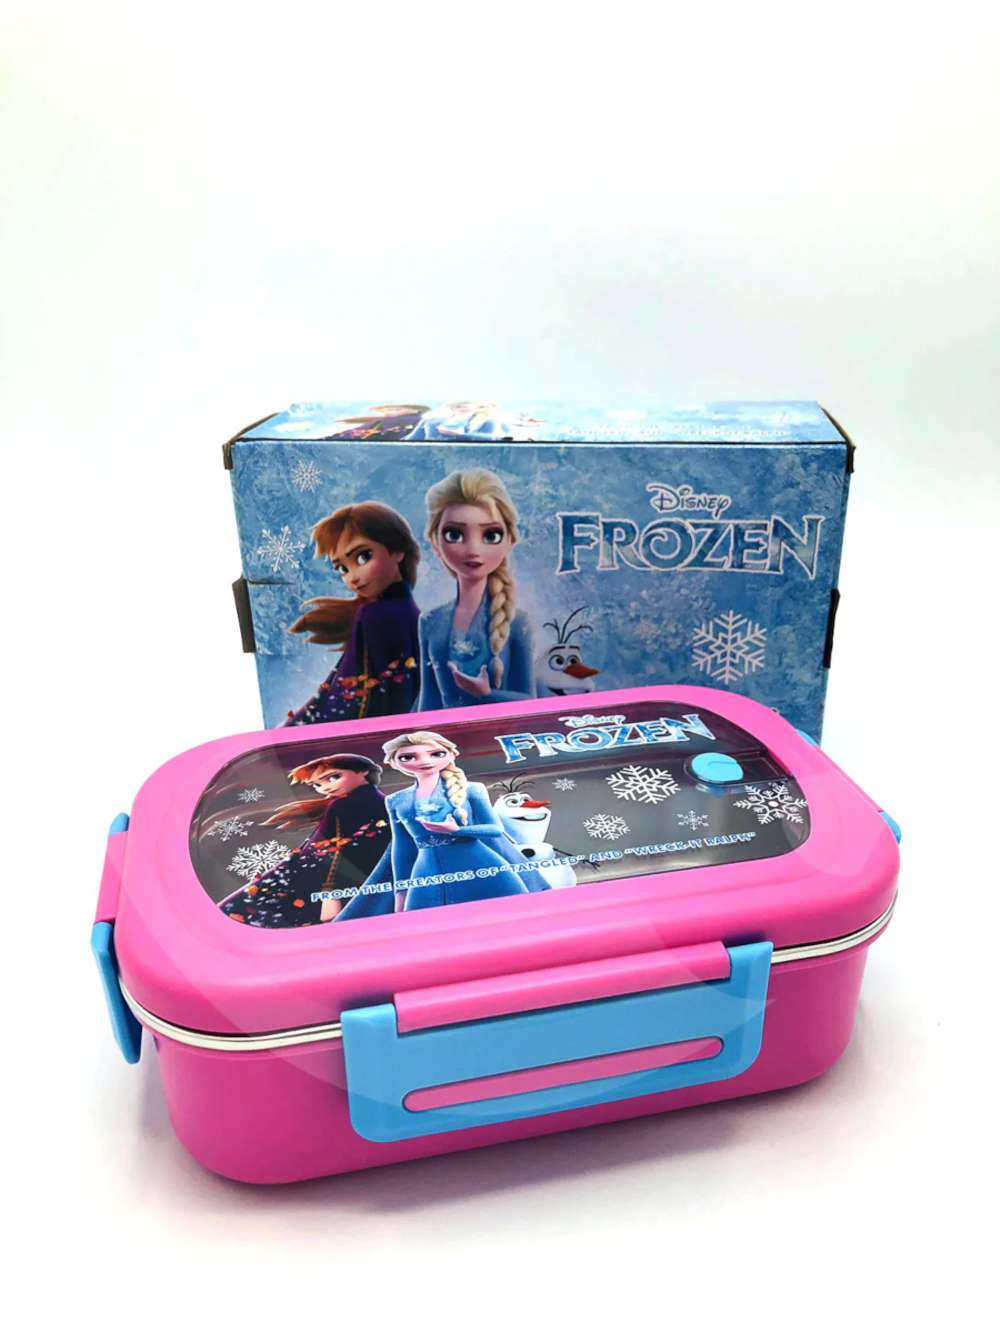 Disney's Frozen Stainless Steel Lunch box High Quality Food Container For Girls